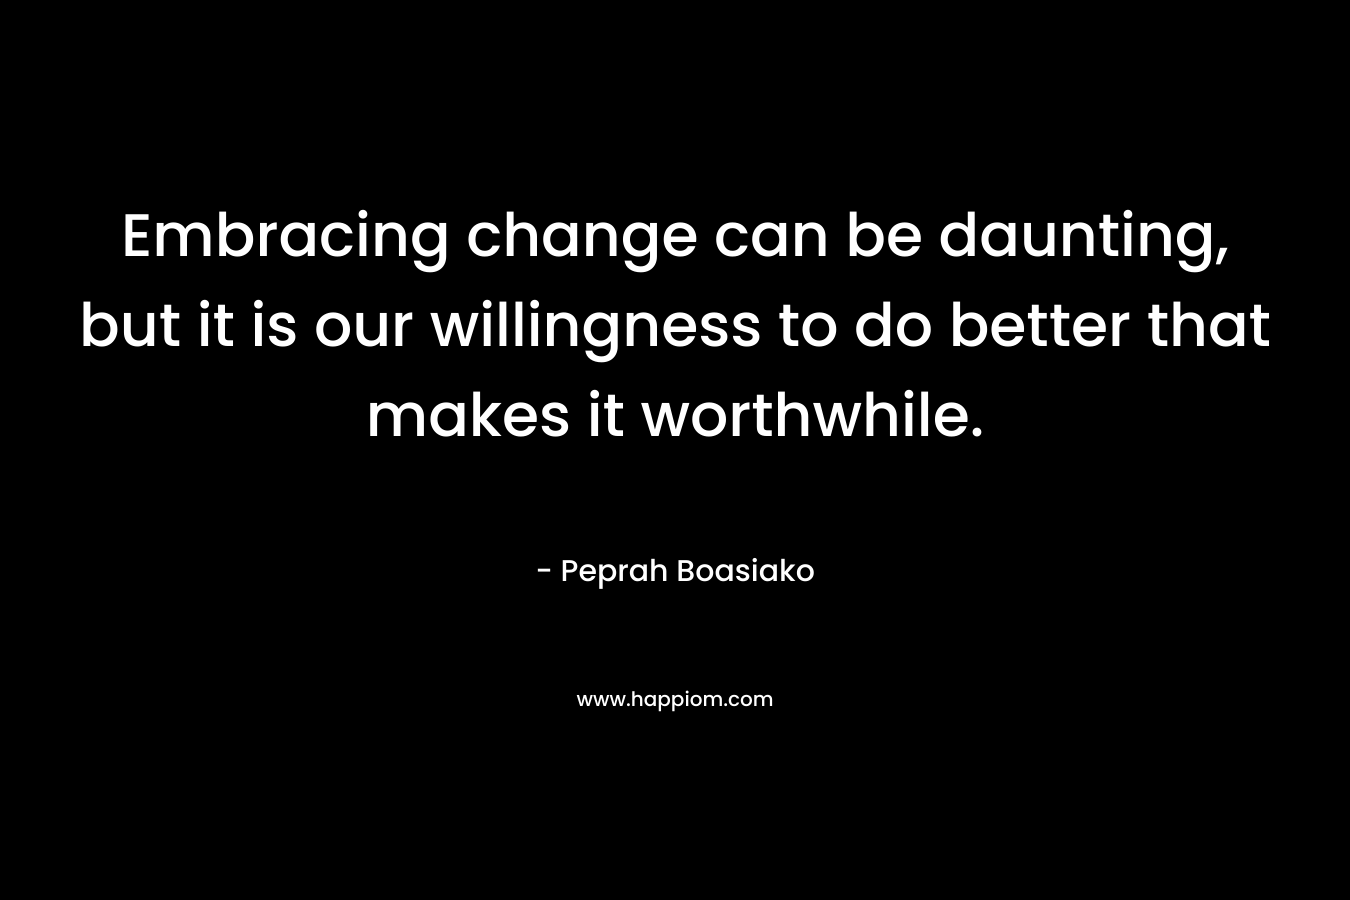 Embracing change can be daunting, but it is our willingness to do better that makes it worthwhile.